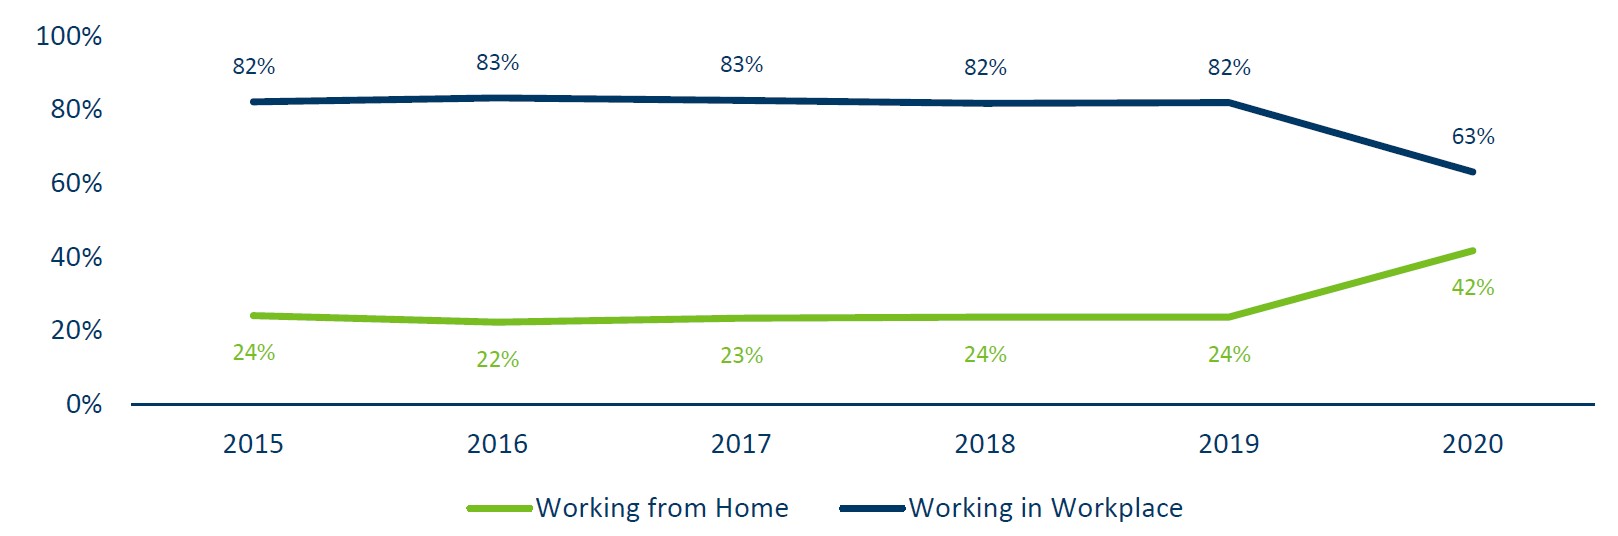 Chart showing percentage of workers who worked from home versus worked in the workplace from 2015-2020